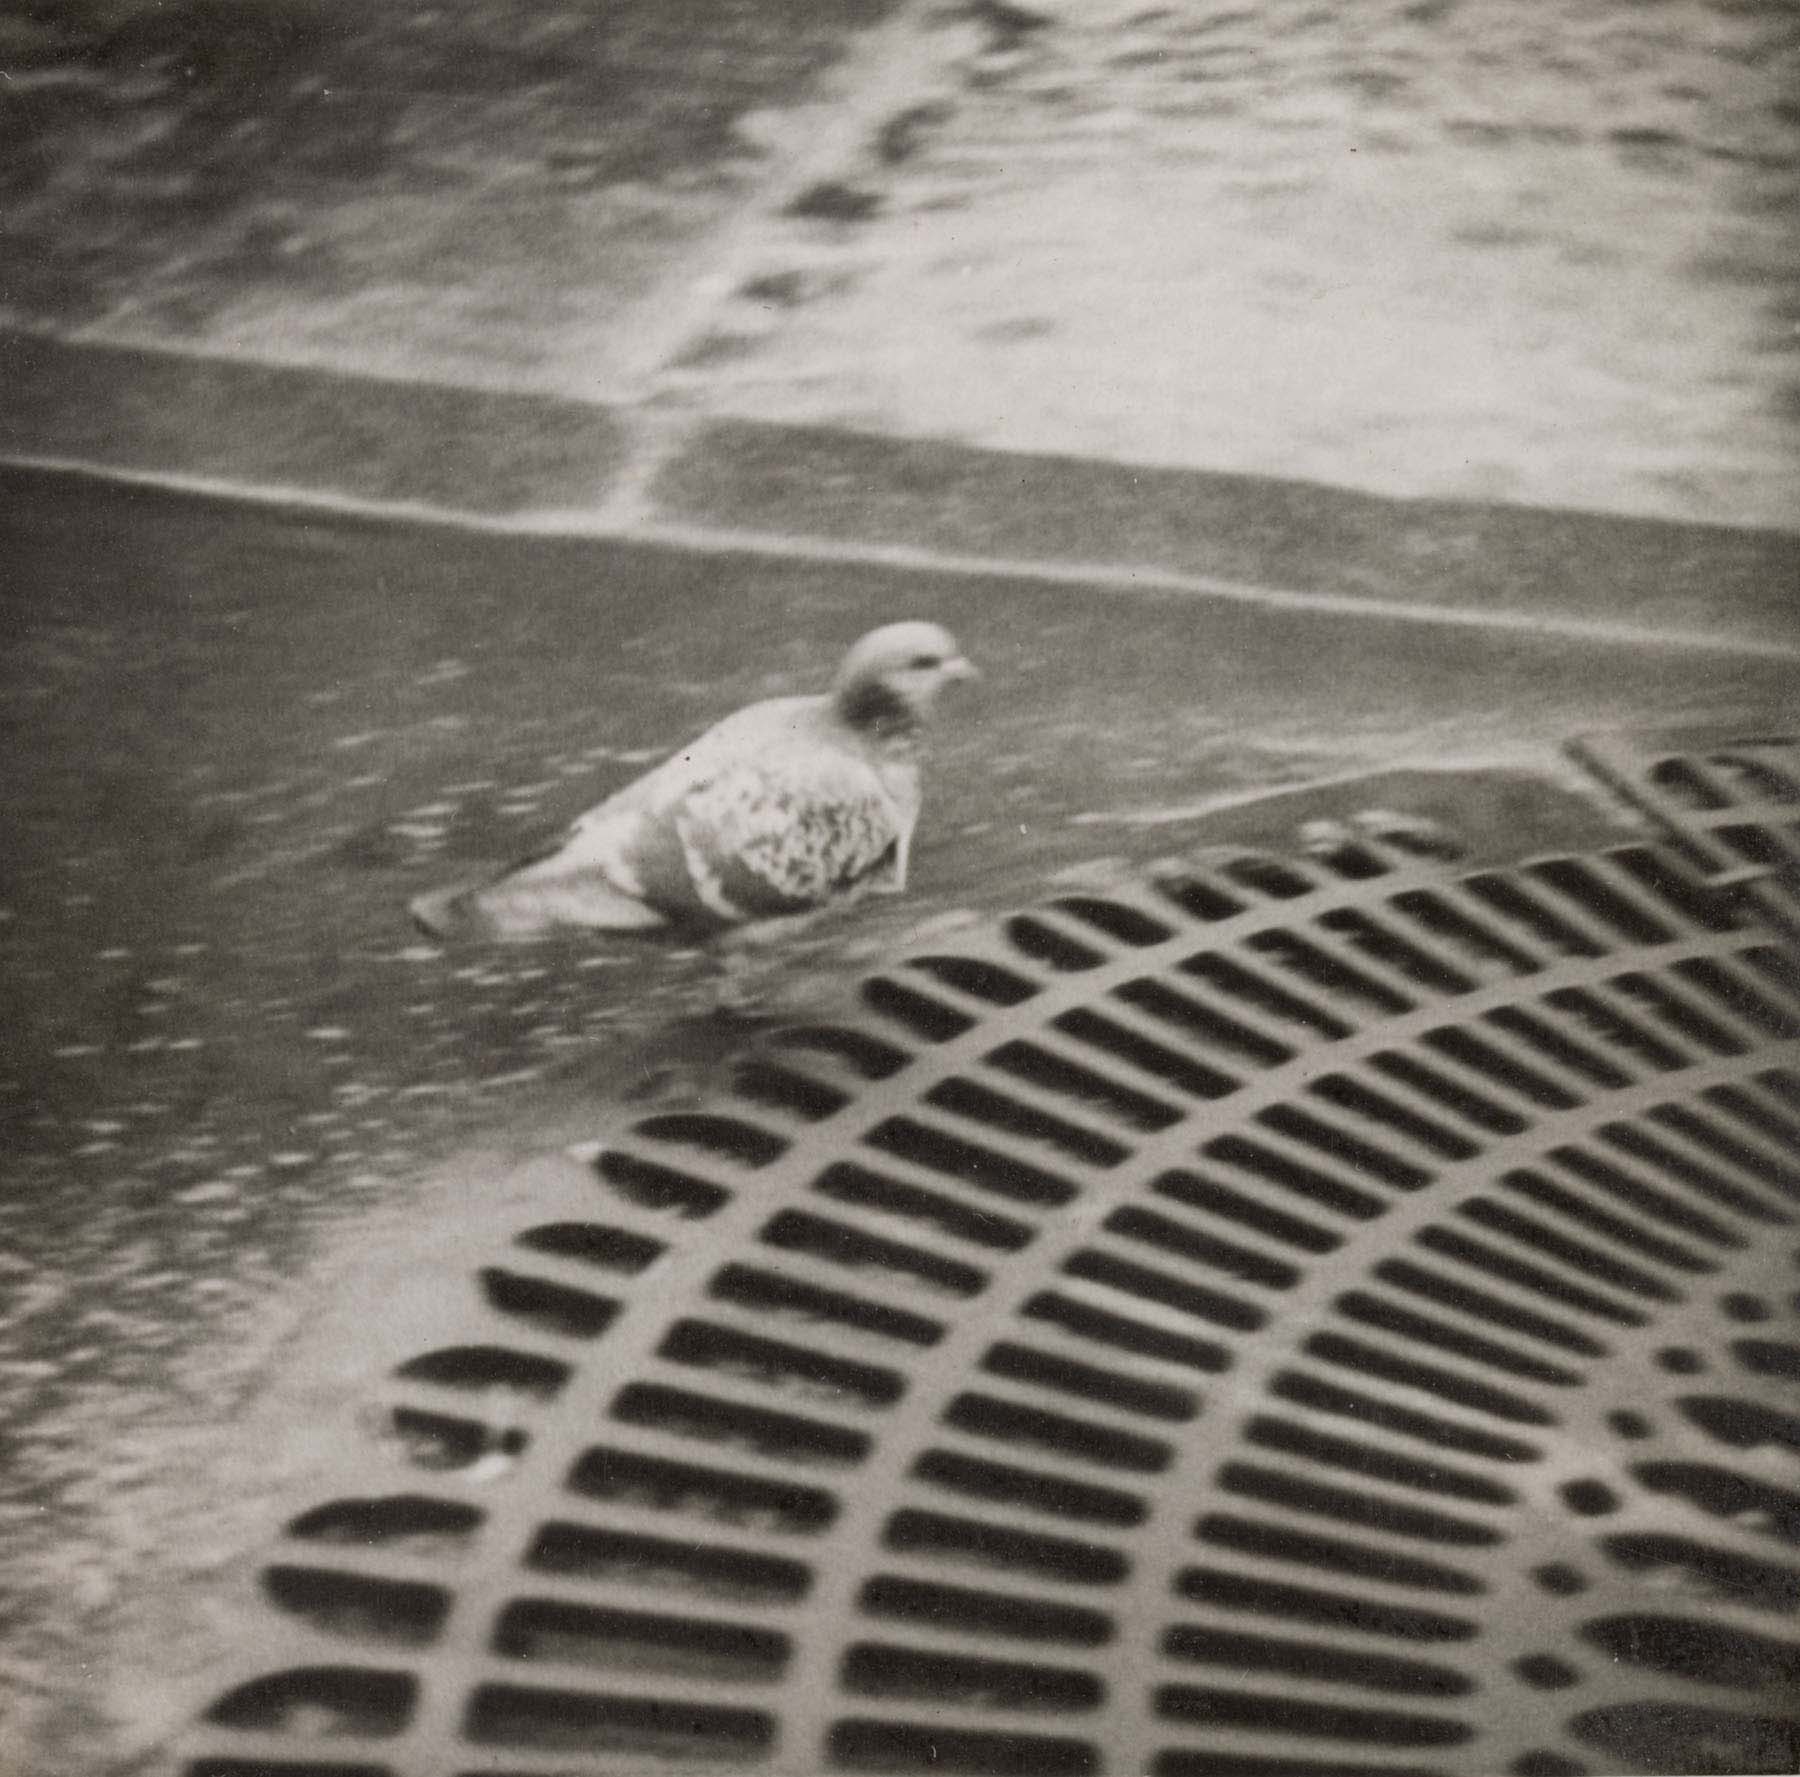 A black-and-white photograph of a pigeon walking near a cast iron tree gate on the sidewalk.